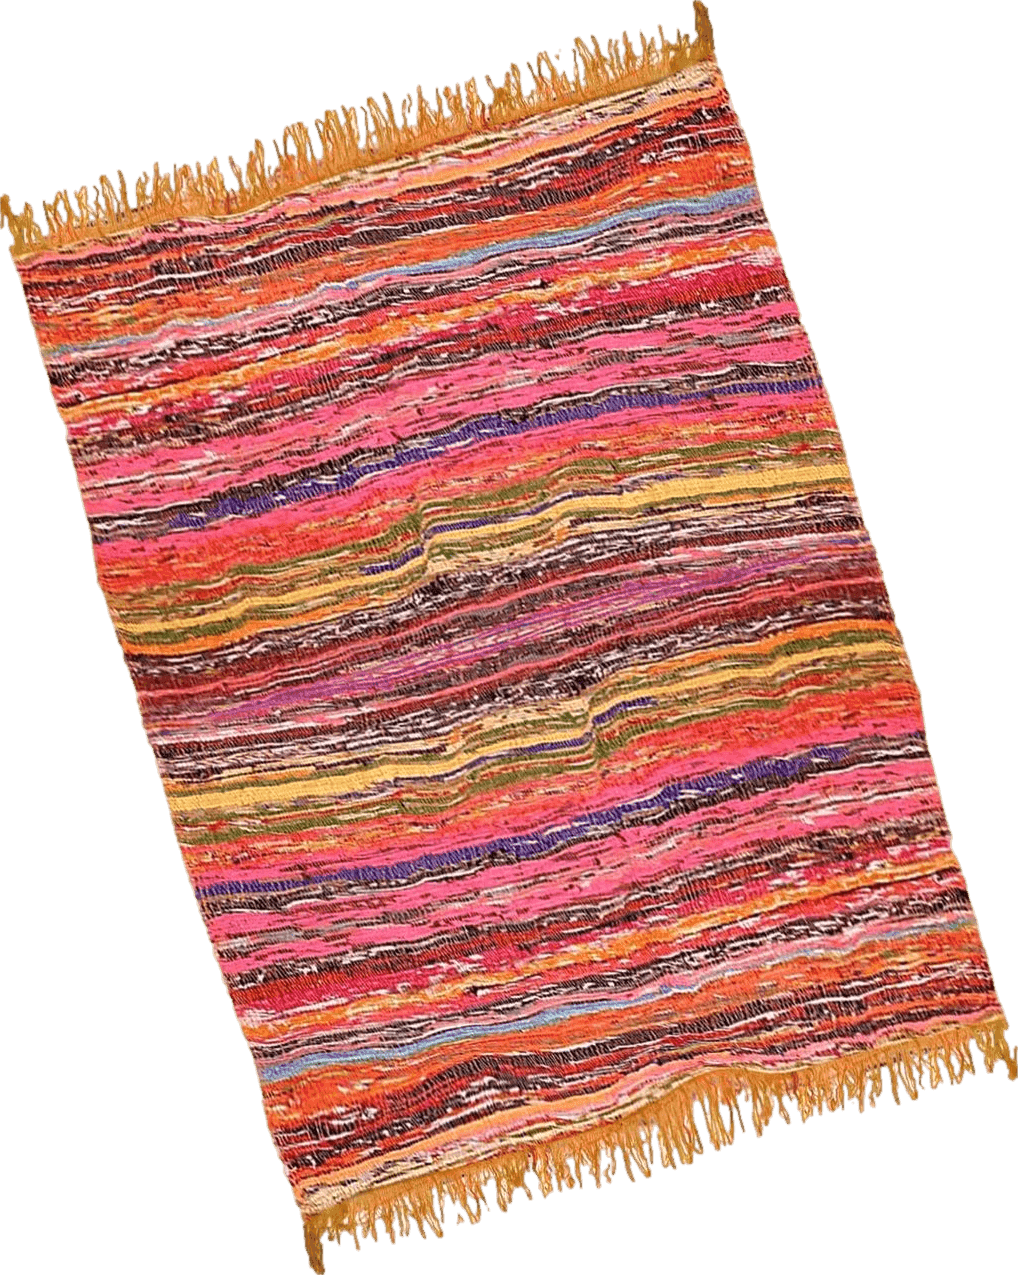 Chindi NAQSH Chindi Area Rag Rug 3.5x6 Feet - Eco Friendly 100% Recycled Cotton Colorful Reversible Runner Rugs, Multicolor Hand Woven Home Collection (Orange Chindi Runner)